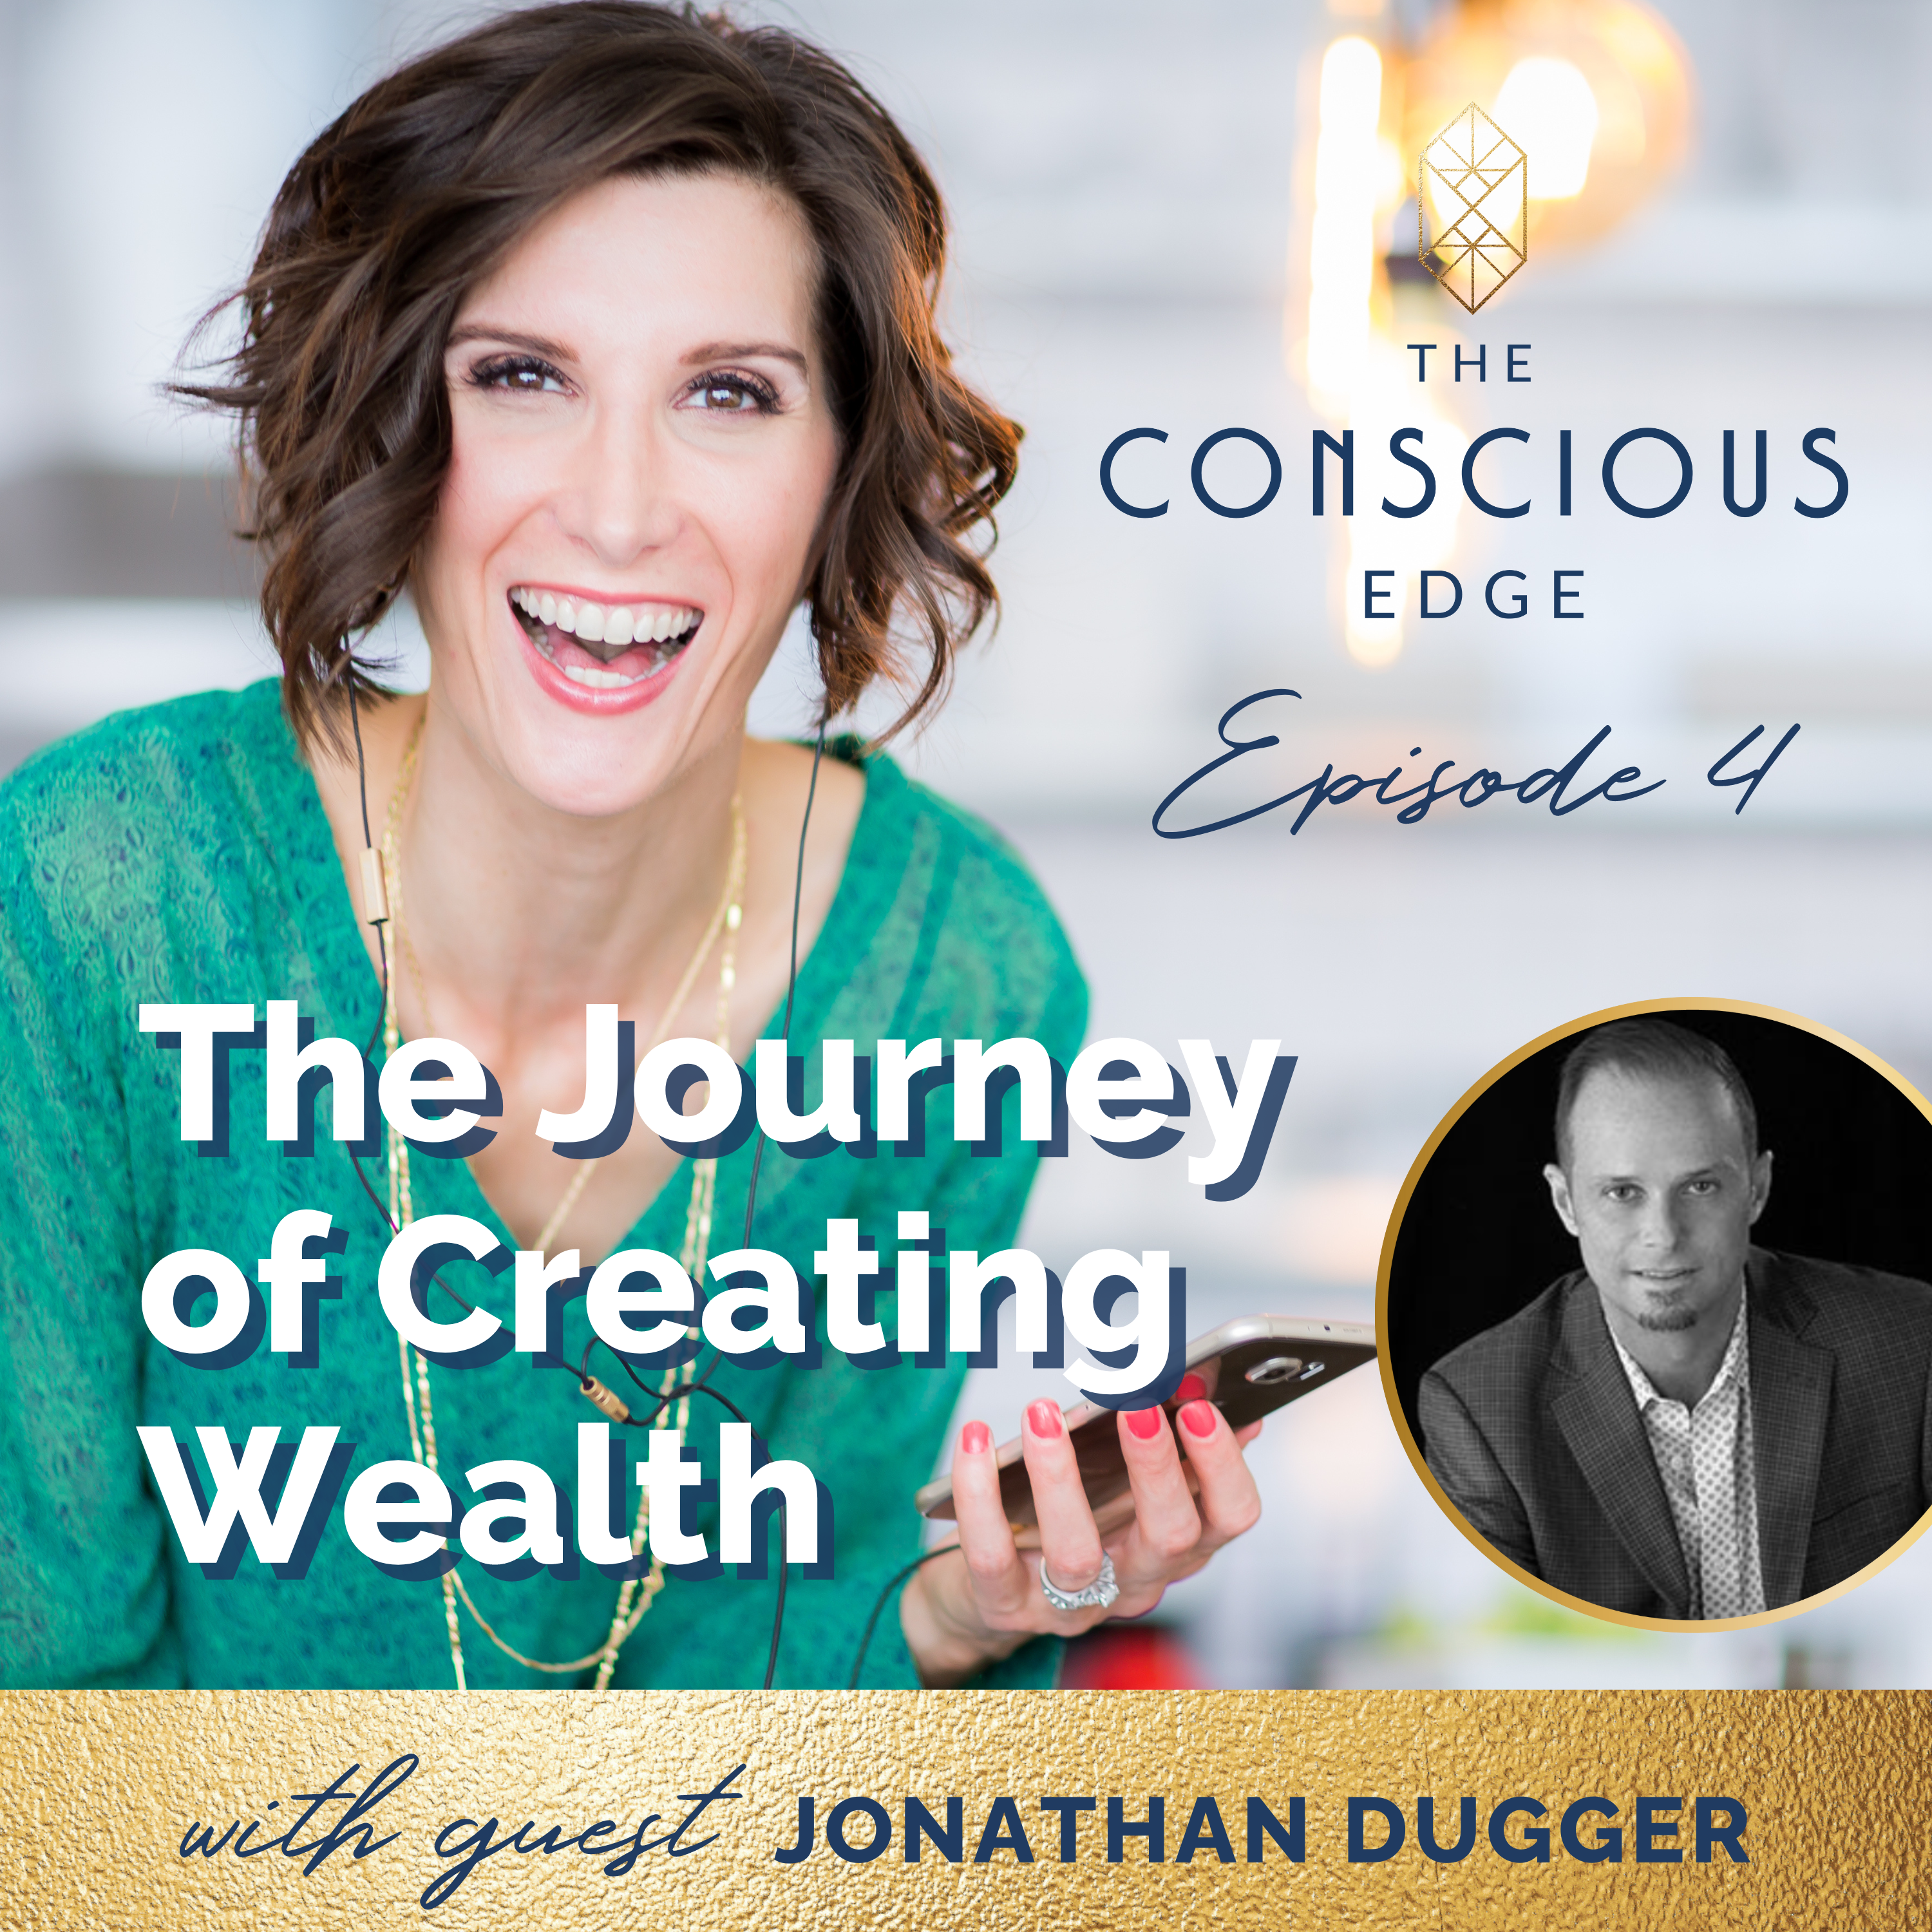 The Journey of Creating Wealth